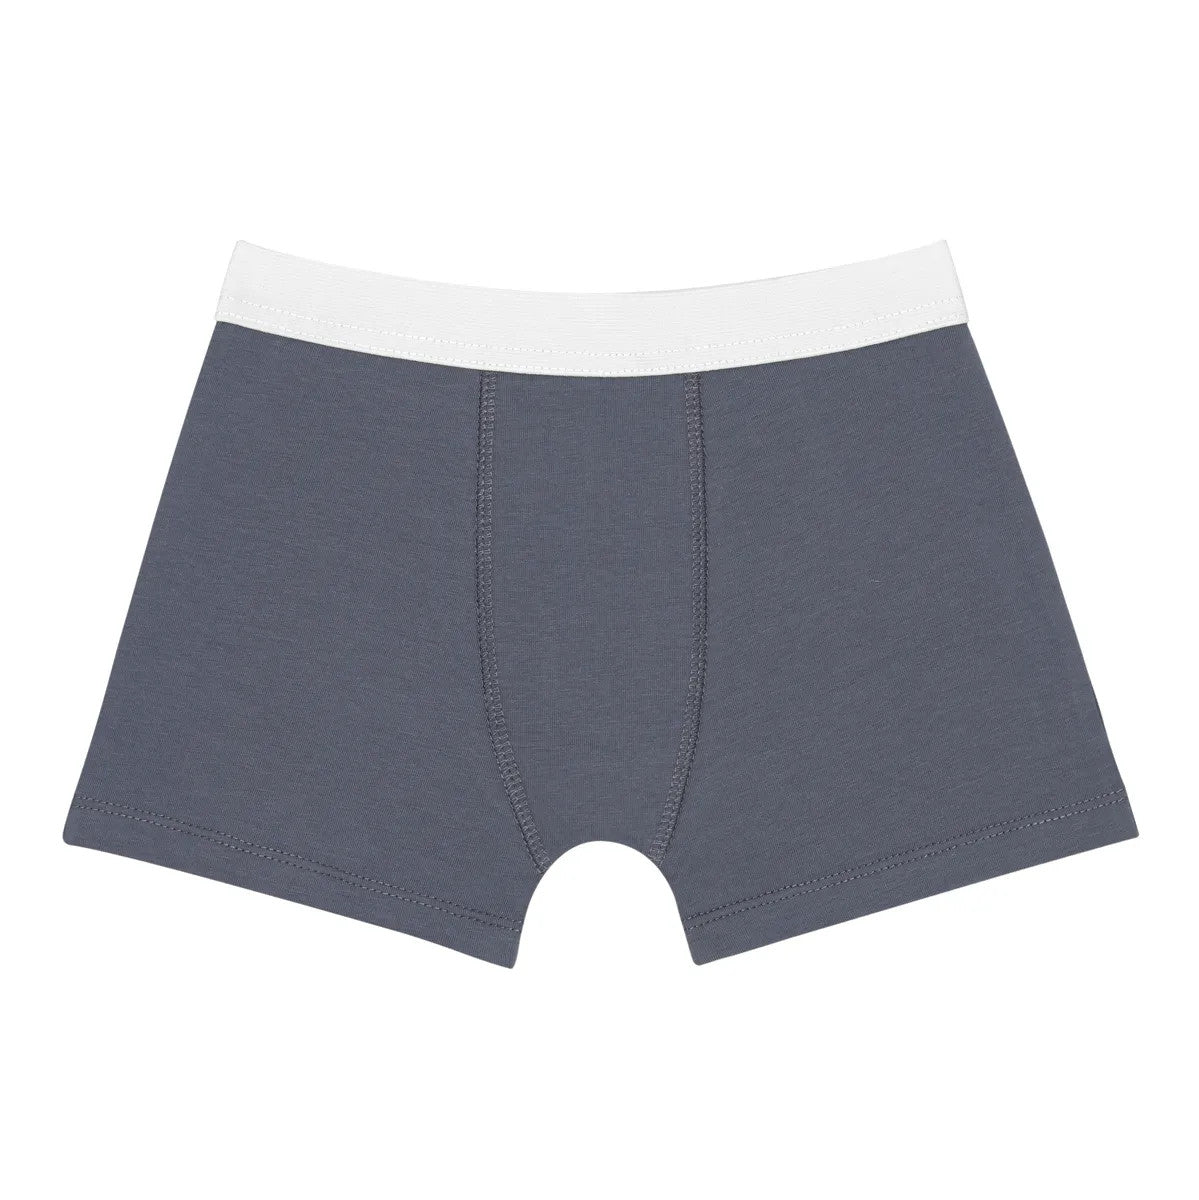 Just the perfect Little Hedonist boy undie. Soft, feels like second skin. Easy to move around in. Made from the best organic cotton there is. 2 pieces per pack.